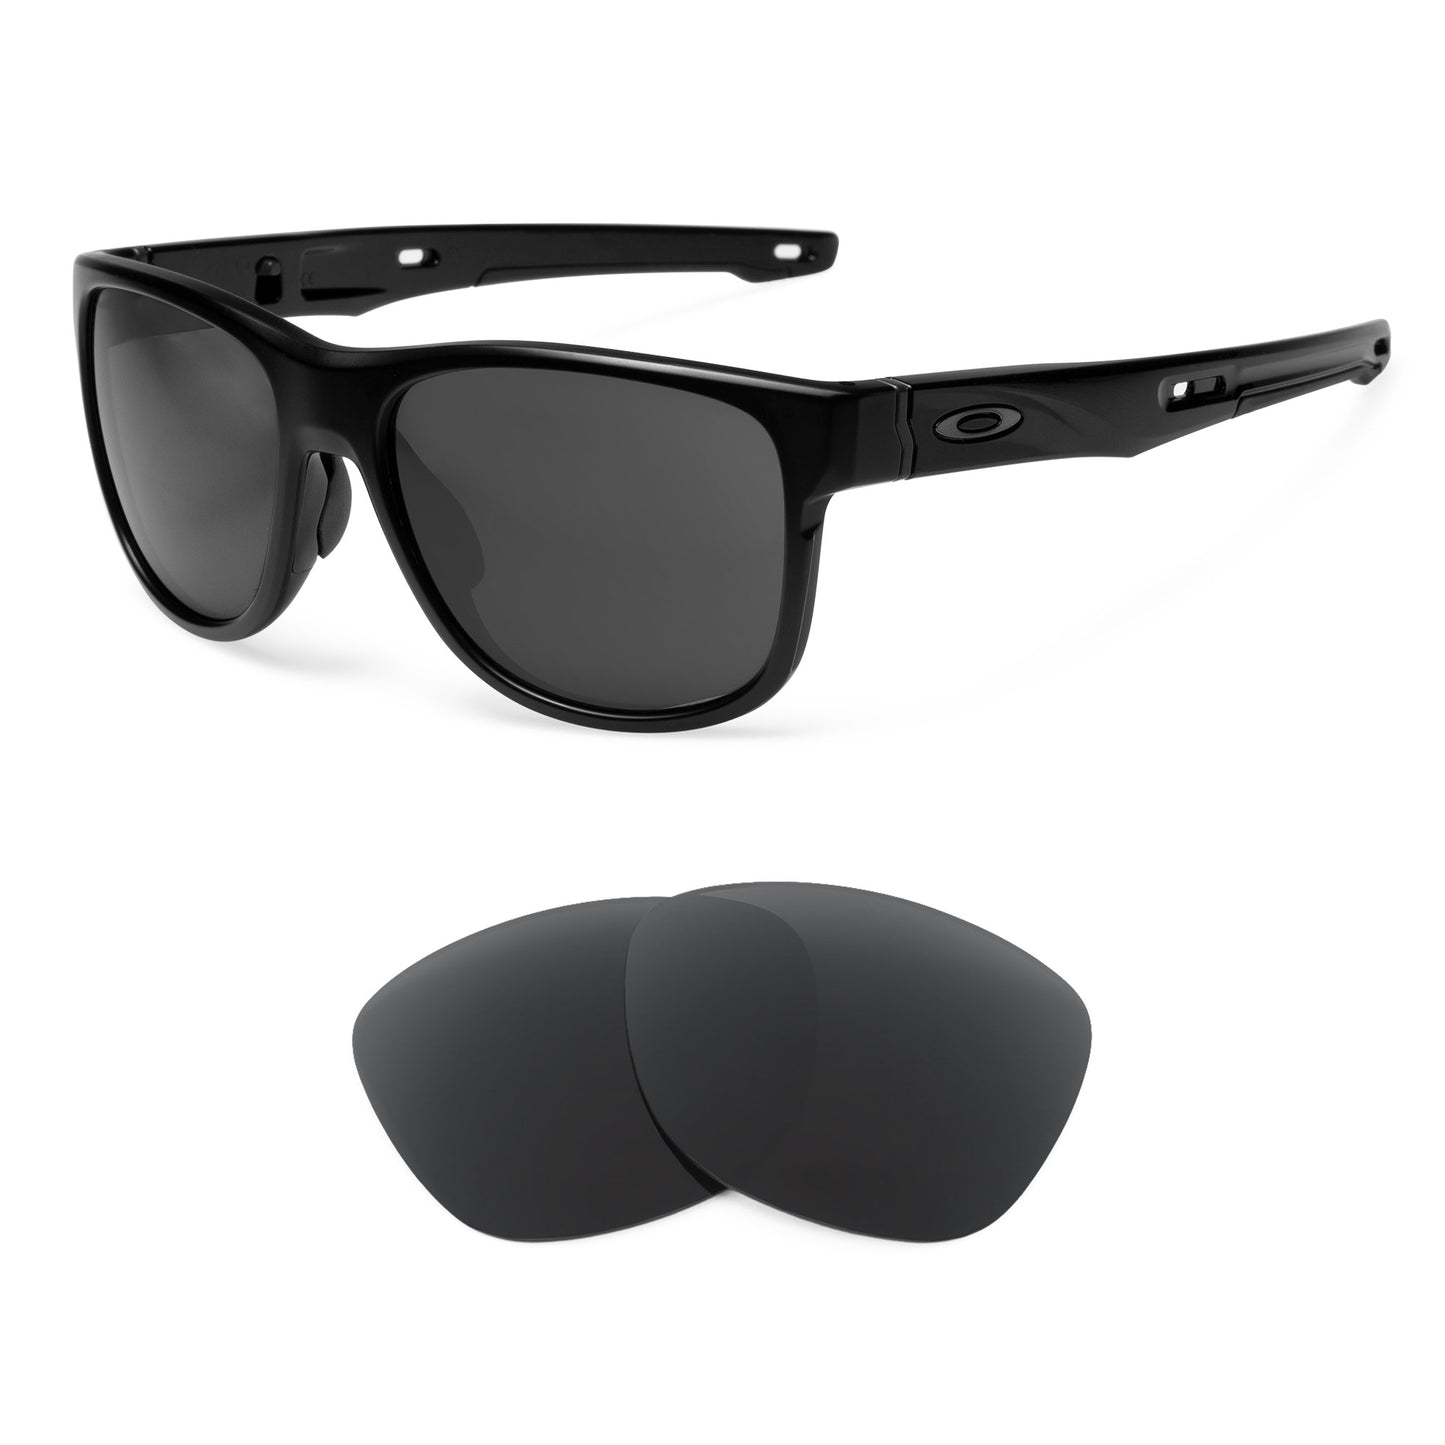 Oakley Crossrange R sunglasses with replacement lenses